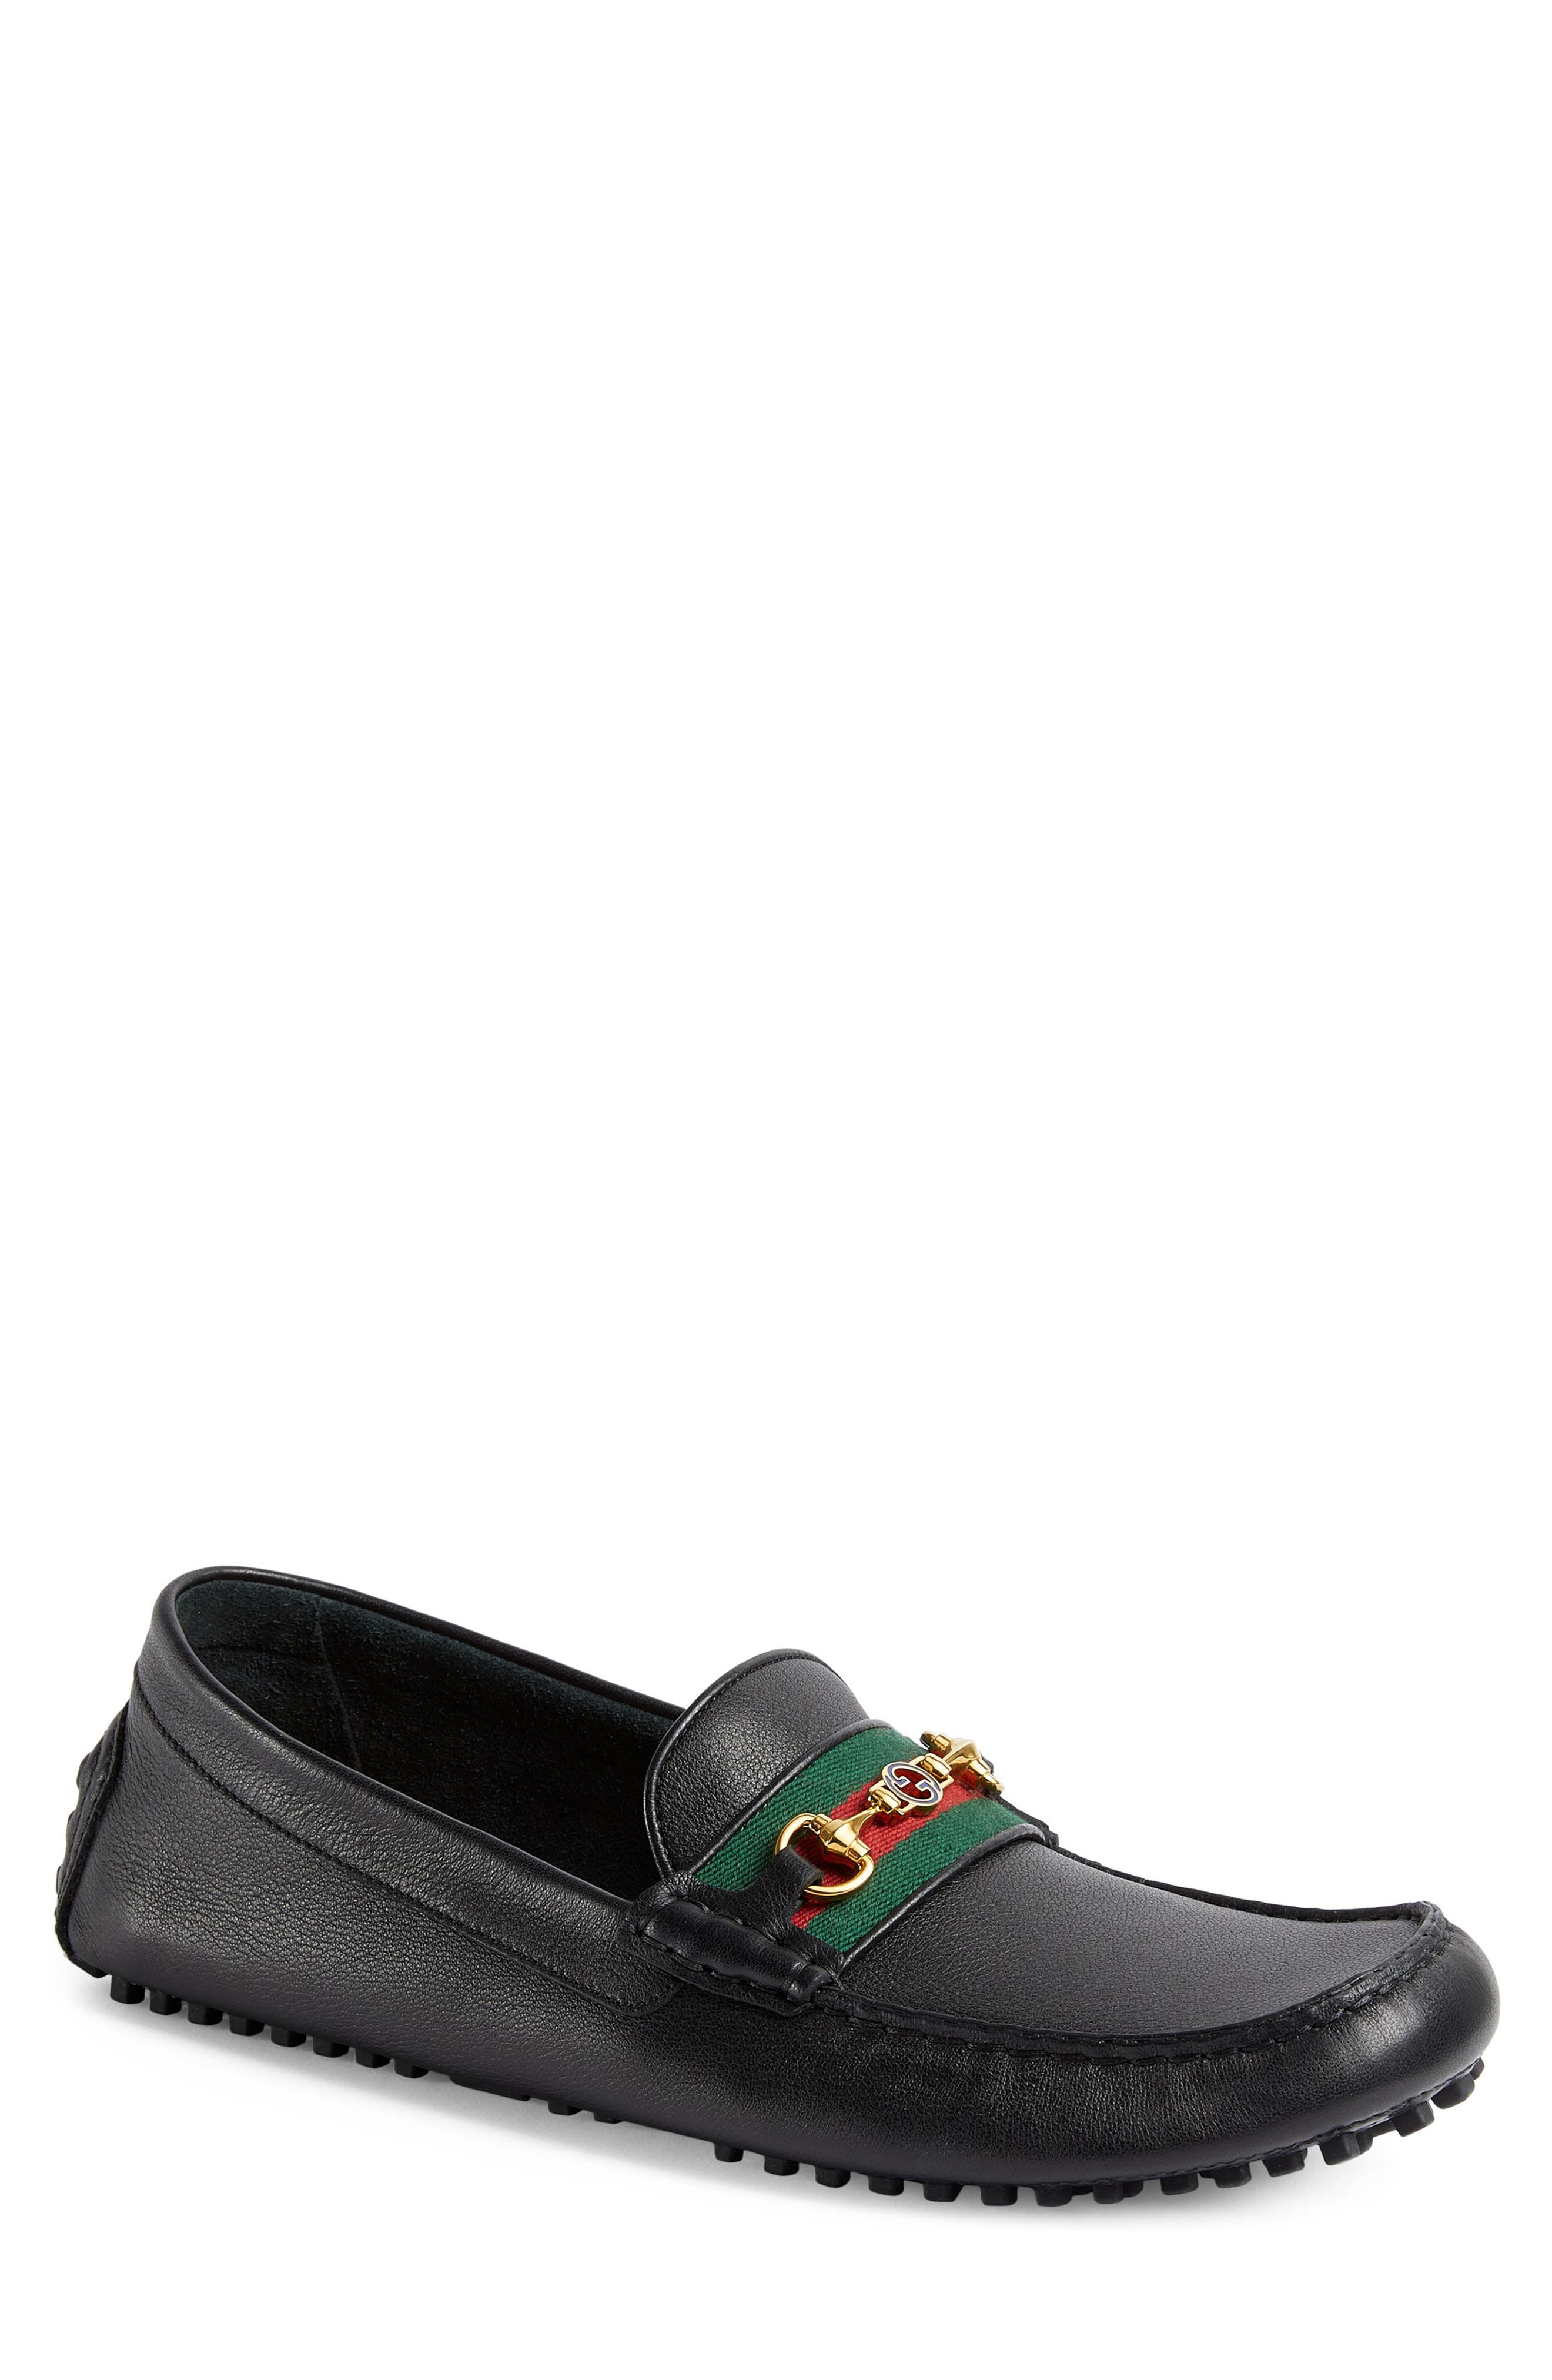 gucci loafers men price